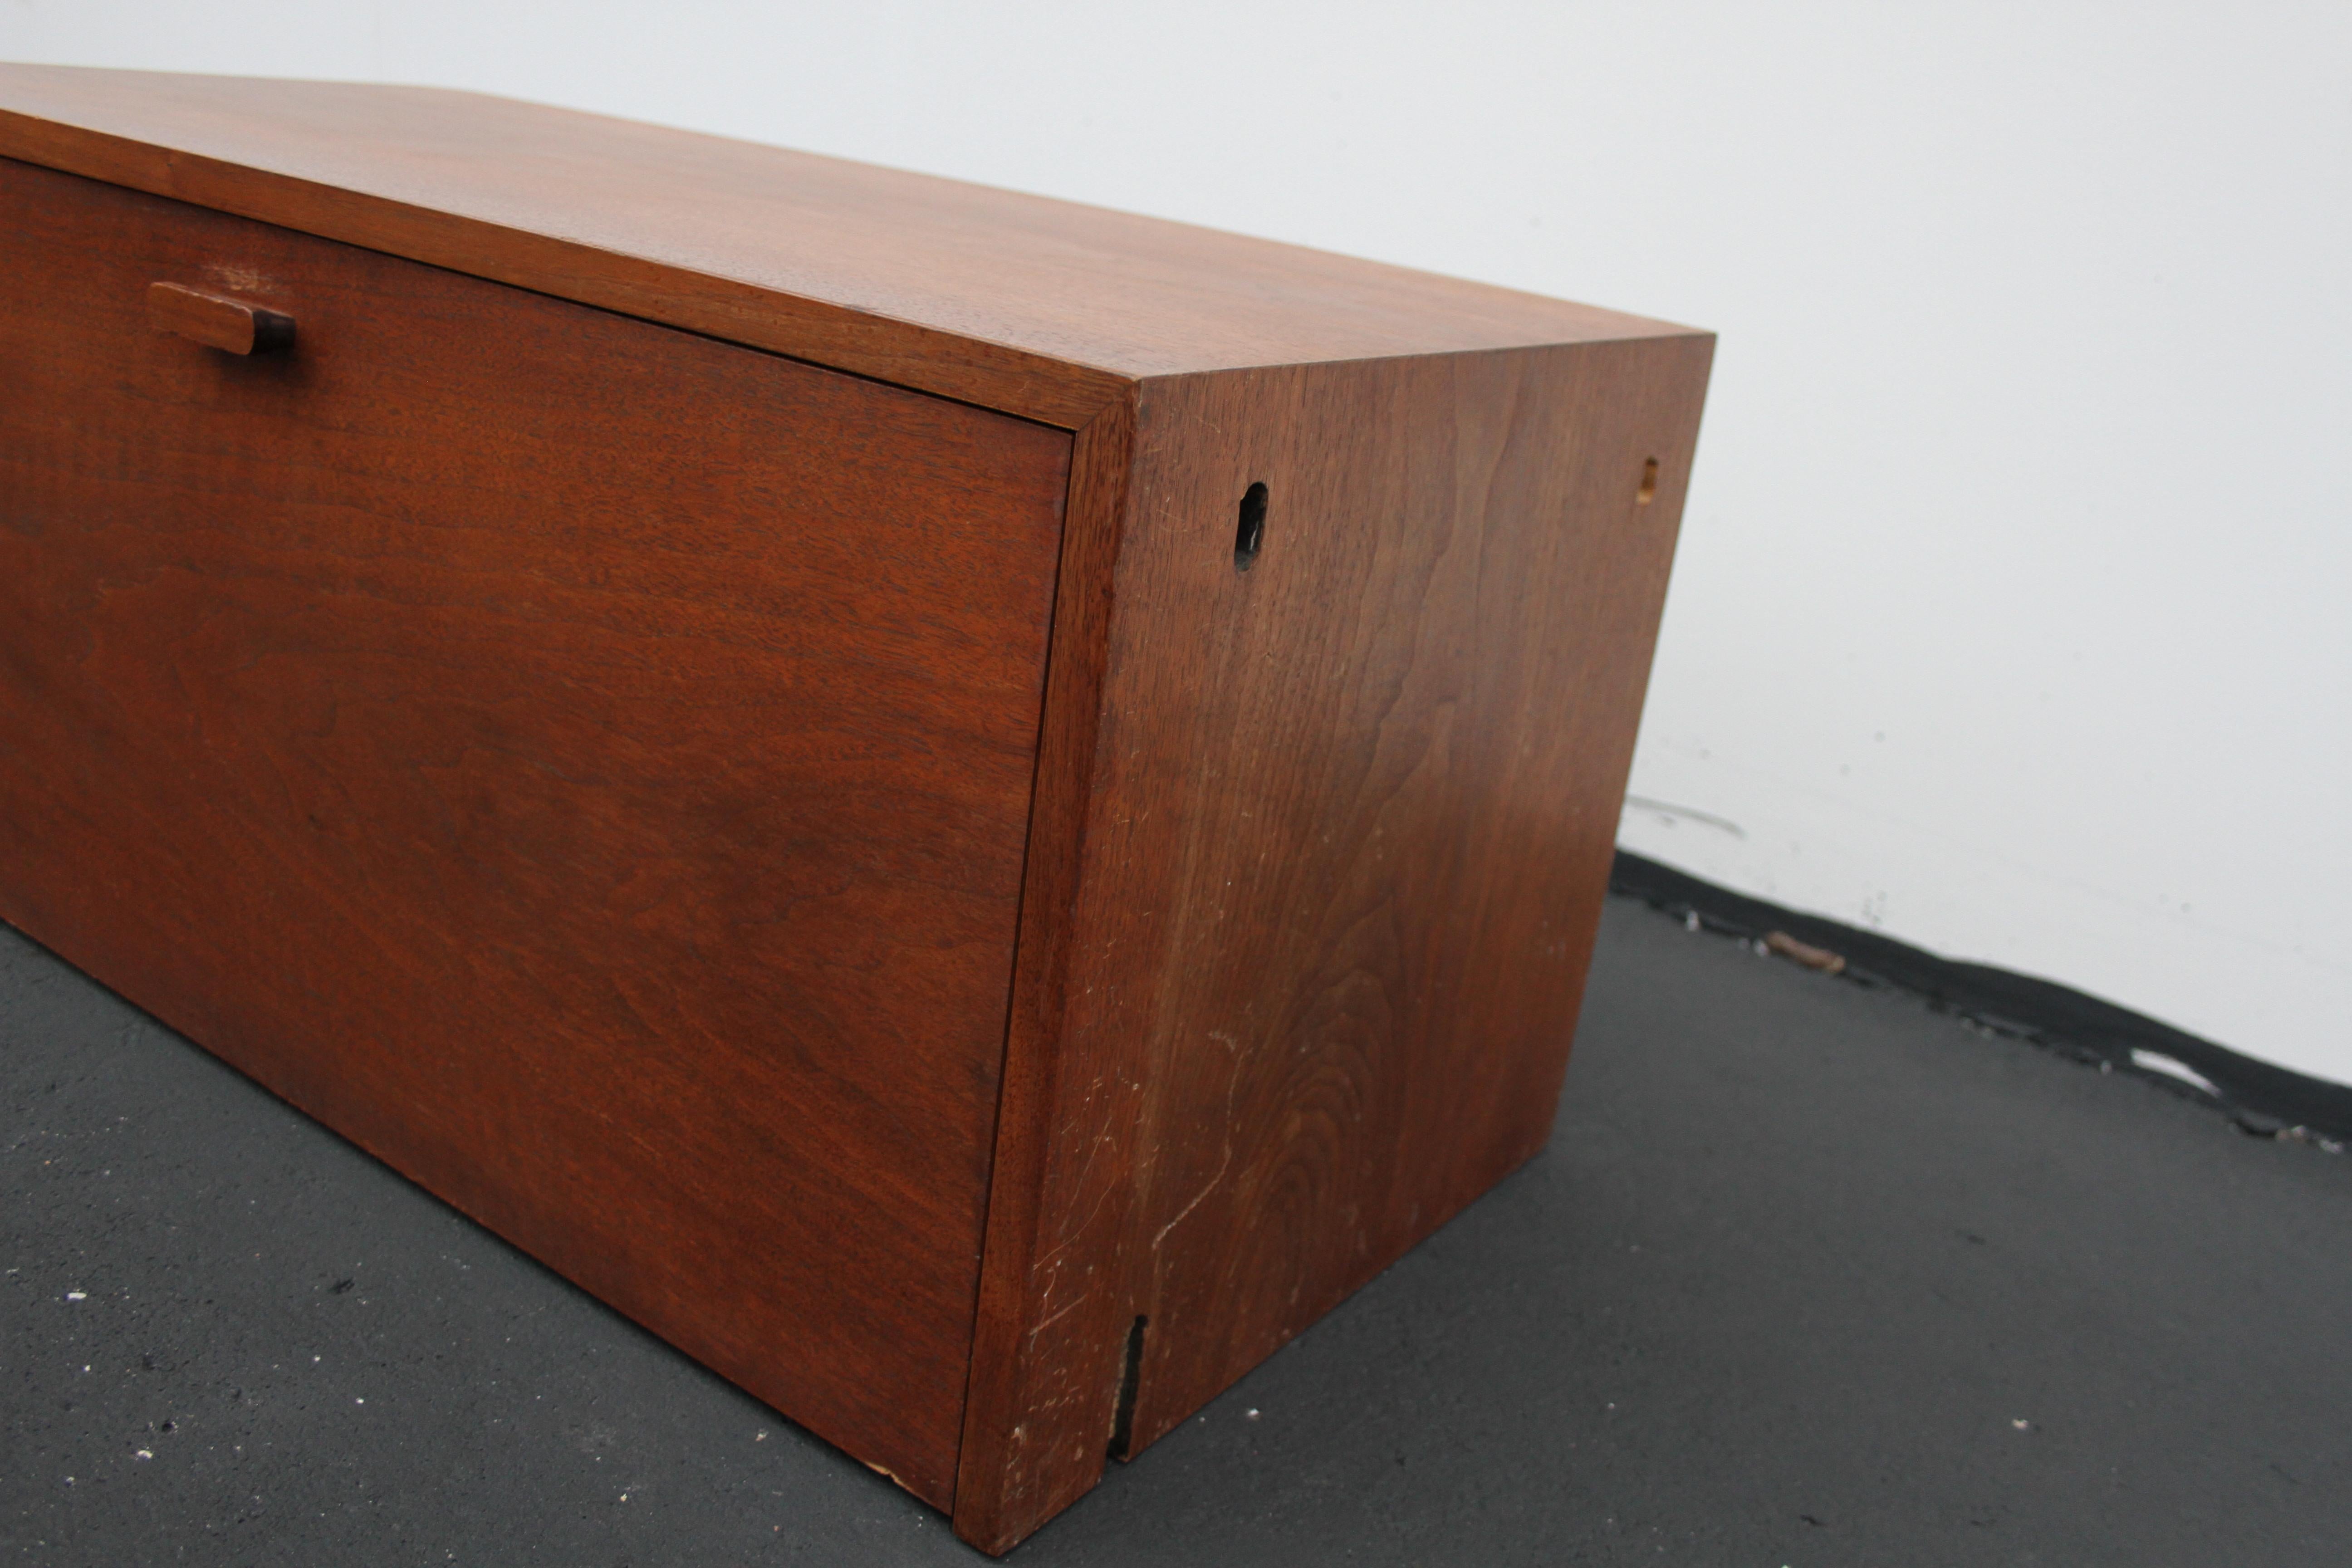 American George Nelson - Omni System - Shelving or Wall Unit Walnut Cabinet Only - Parts For Sale